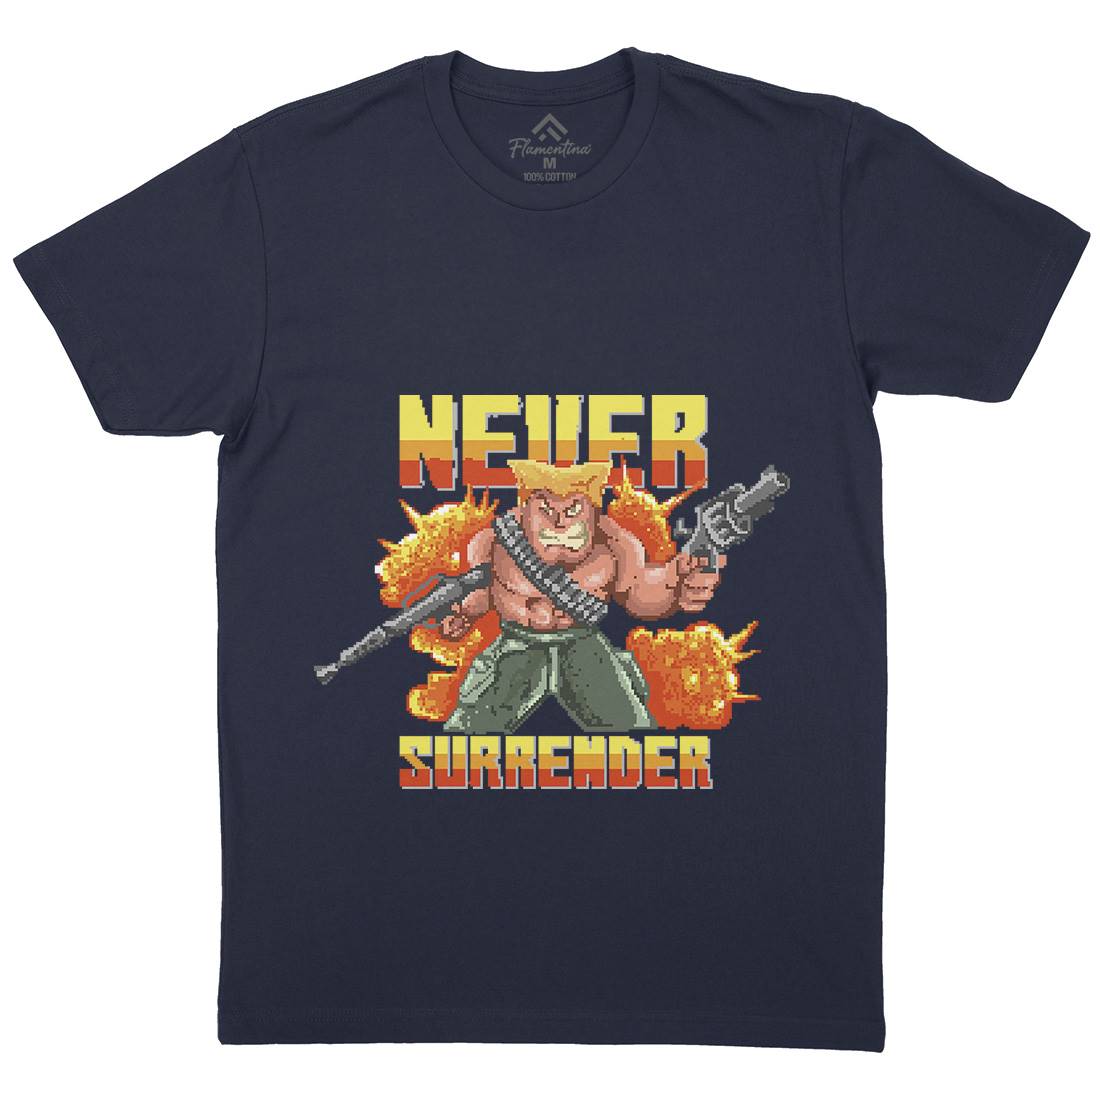 Never Surrender Mens Crew Neck T-Shirt Army B939